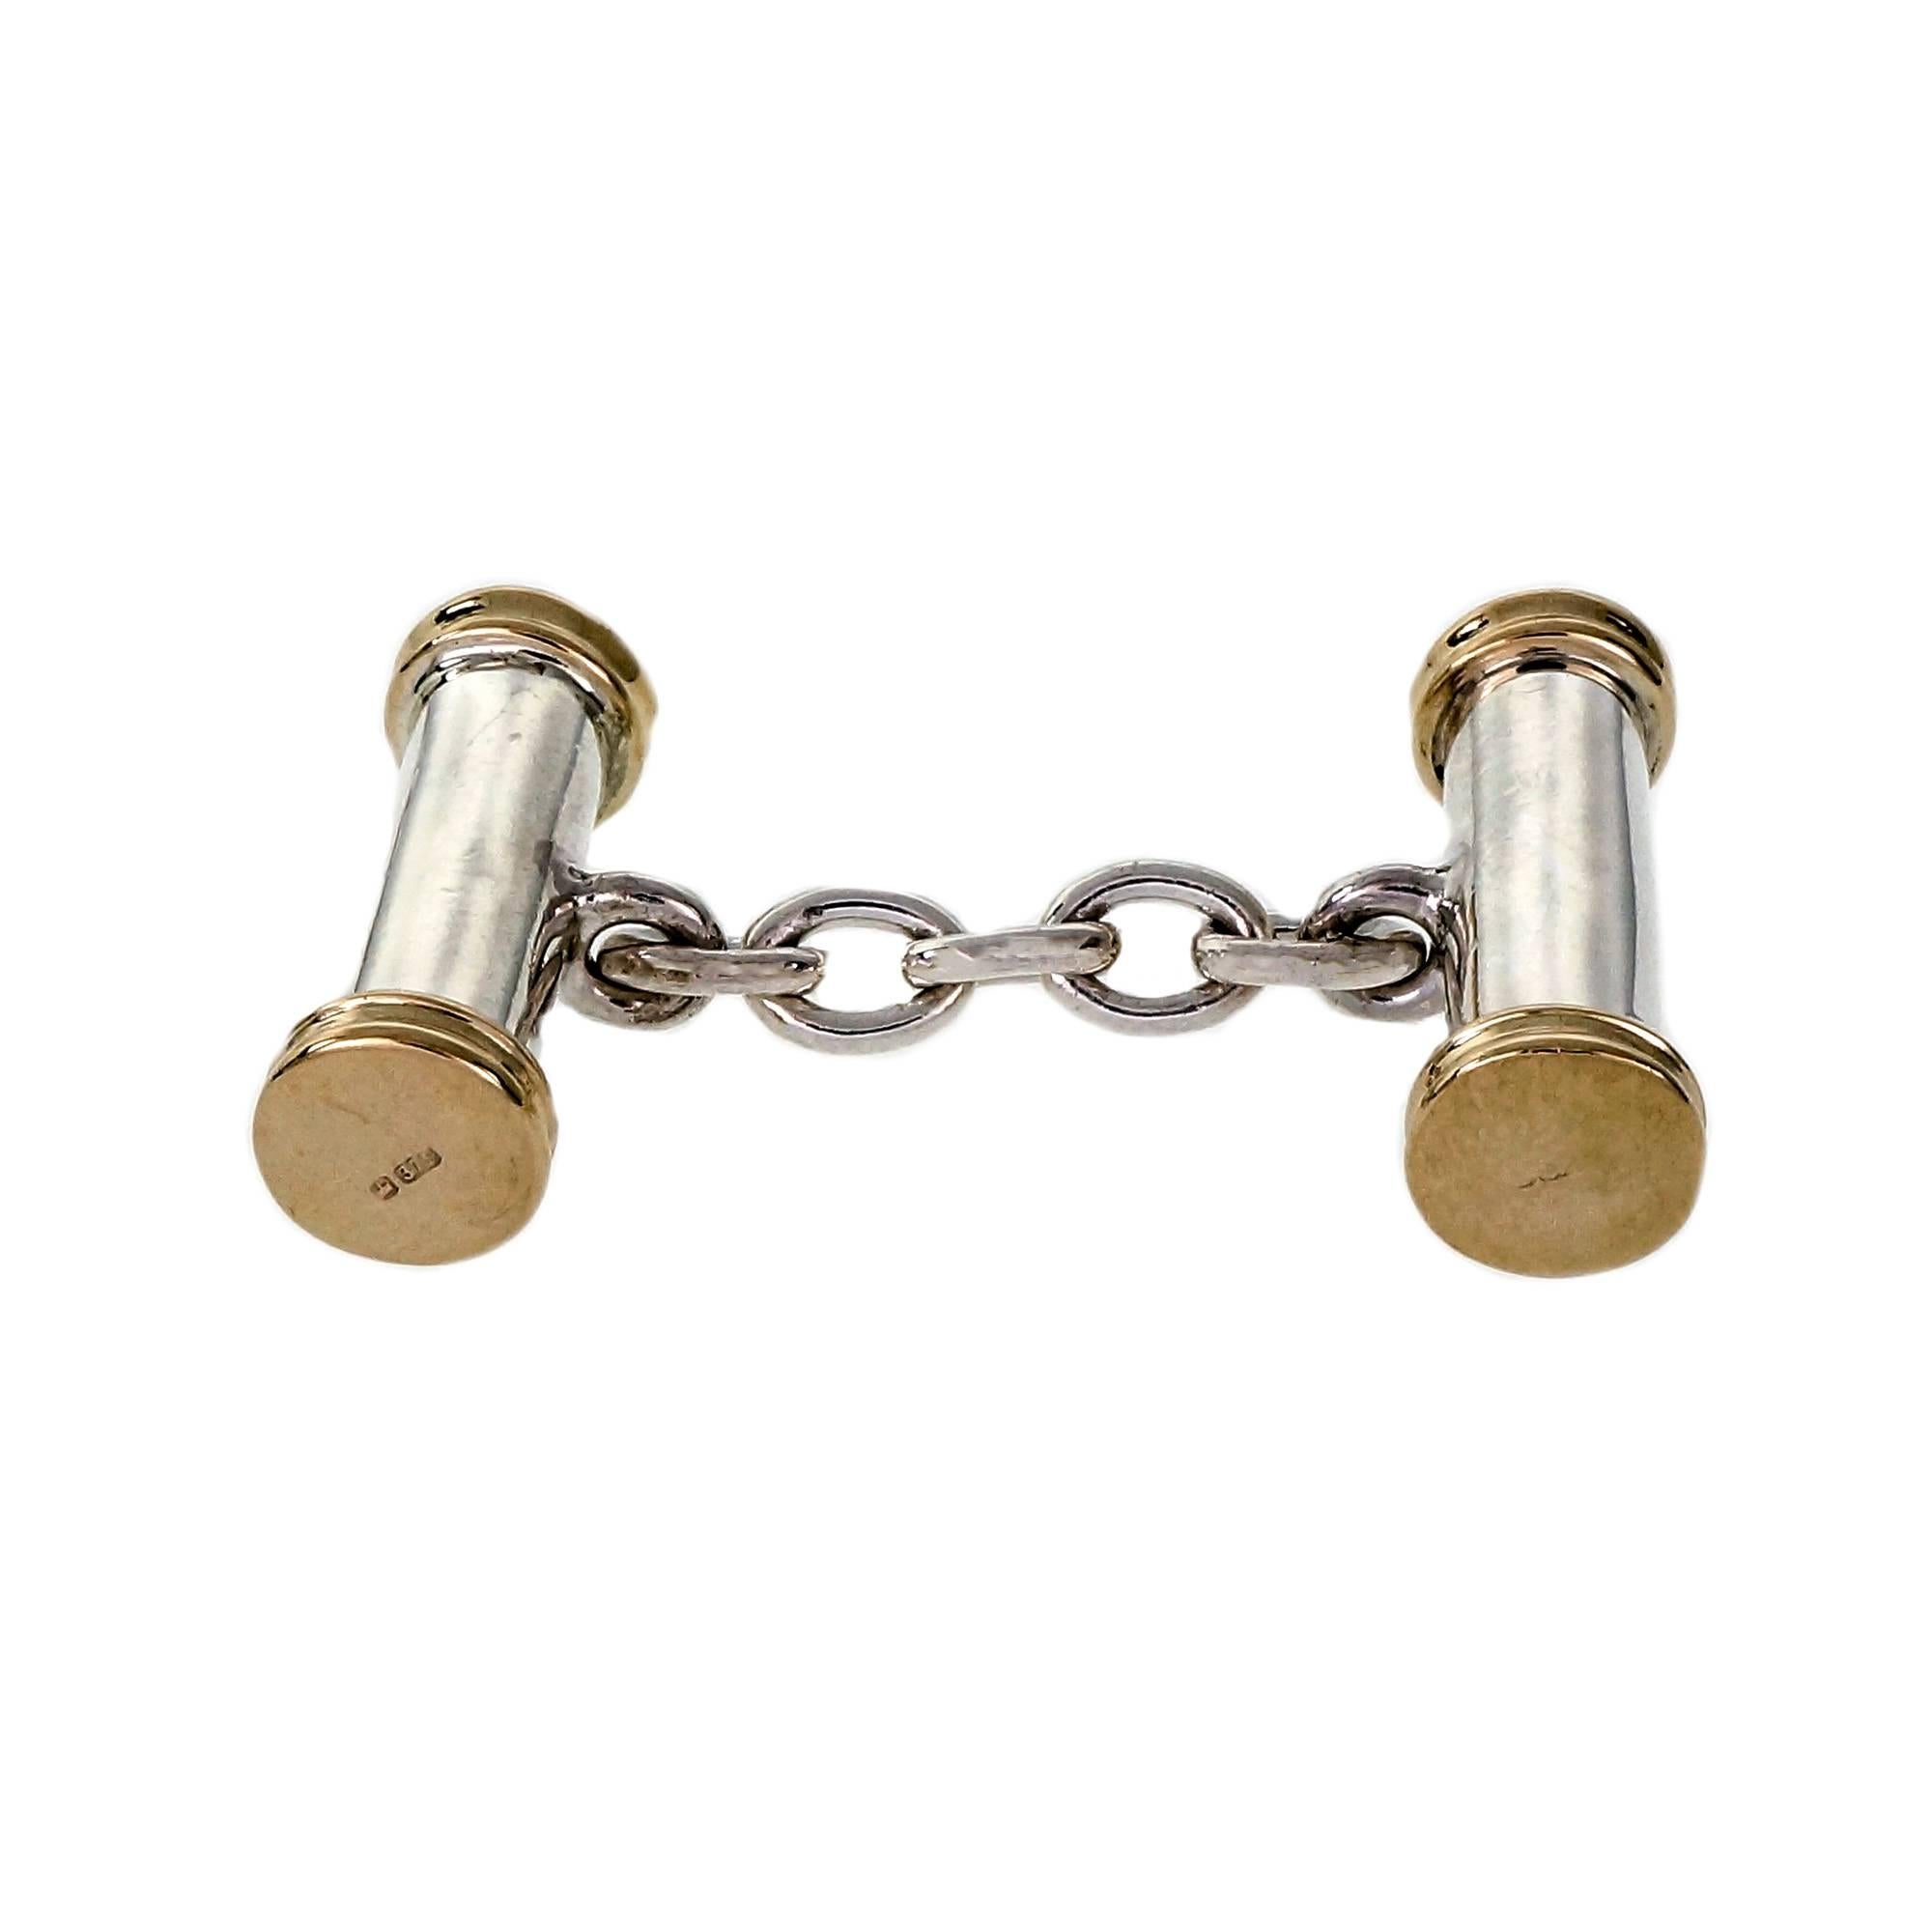 Handmade English cufflinks in solid Sterling silver and 9k yellow gold from PGK. English hallmarks.

9k yellow gold and silver
Top to bottom: 19.51mm or .77 inch
Width: 6.56mm or .26 inch
Depth: 6.66mm
19.2 grams
Tested: 9k & silver
Stamped: